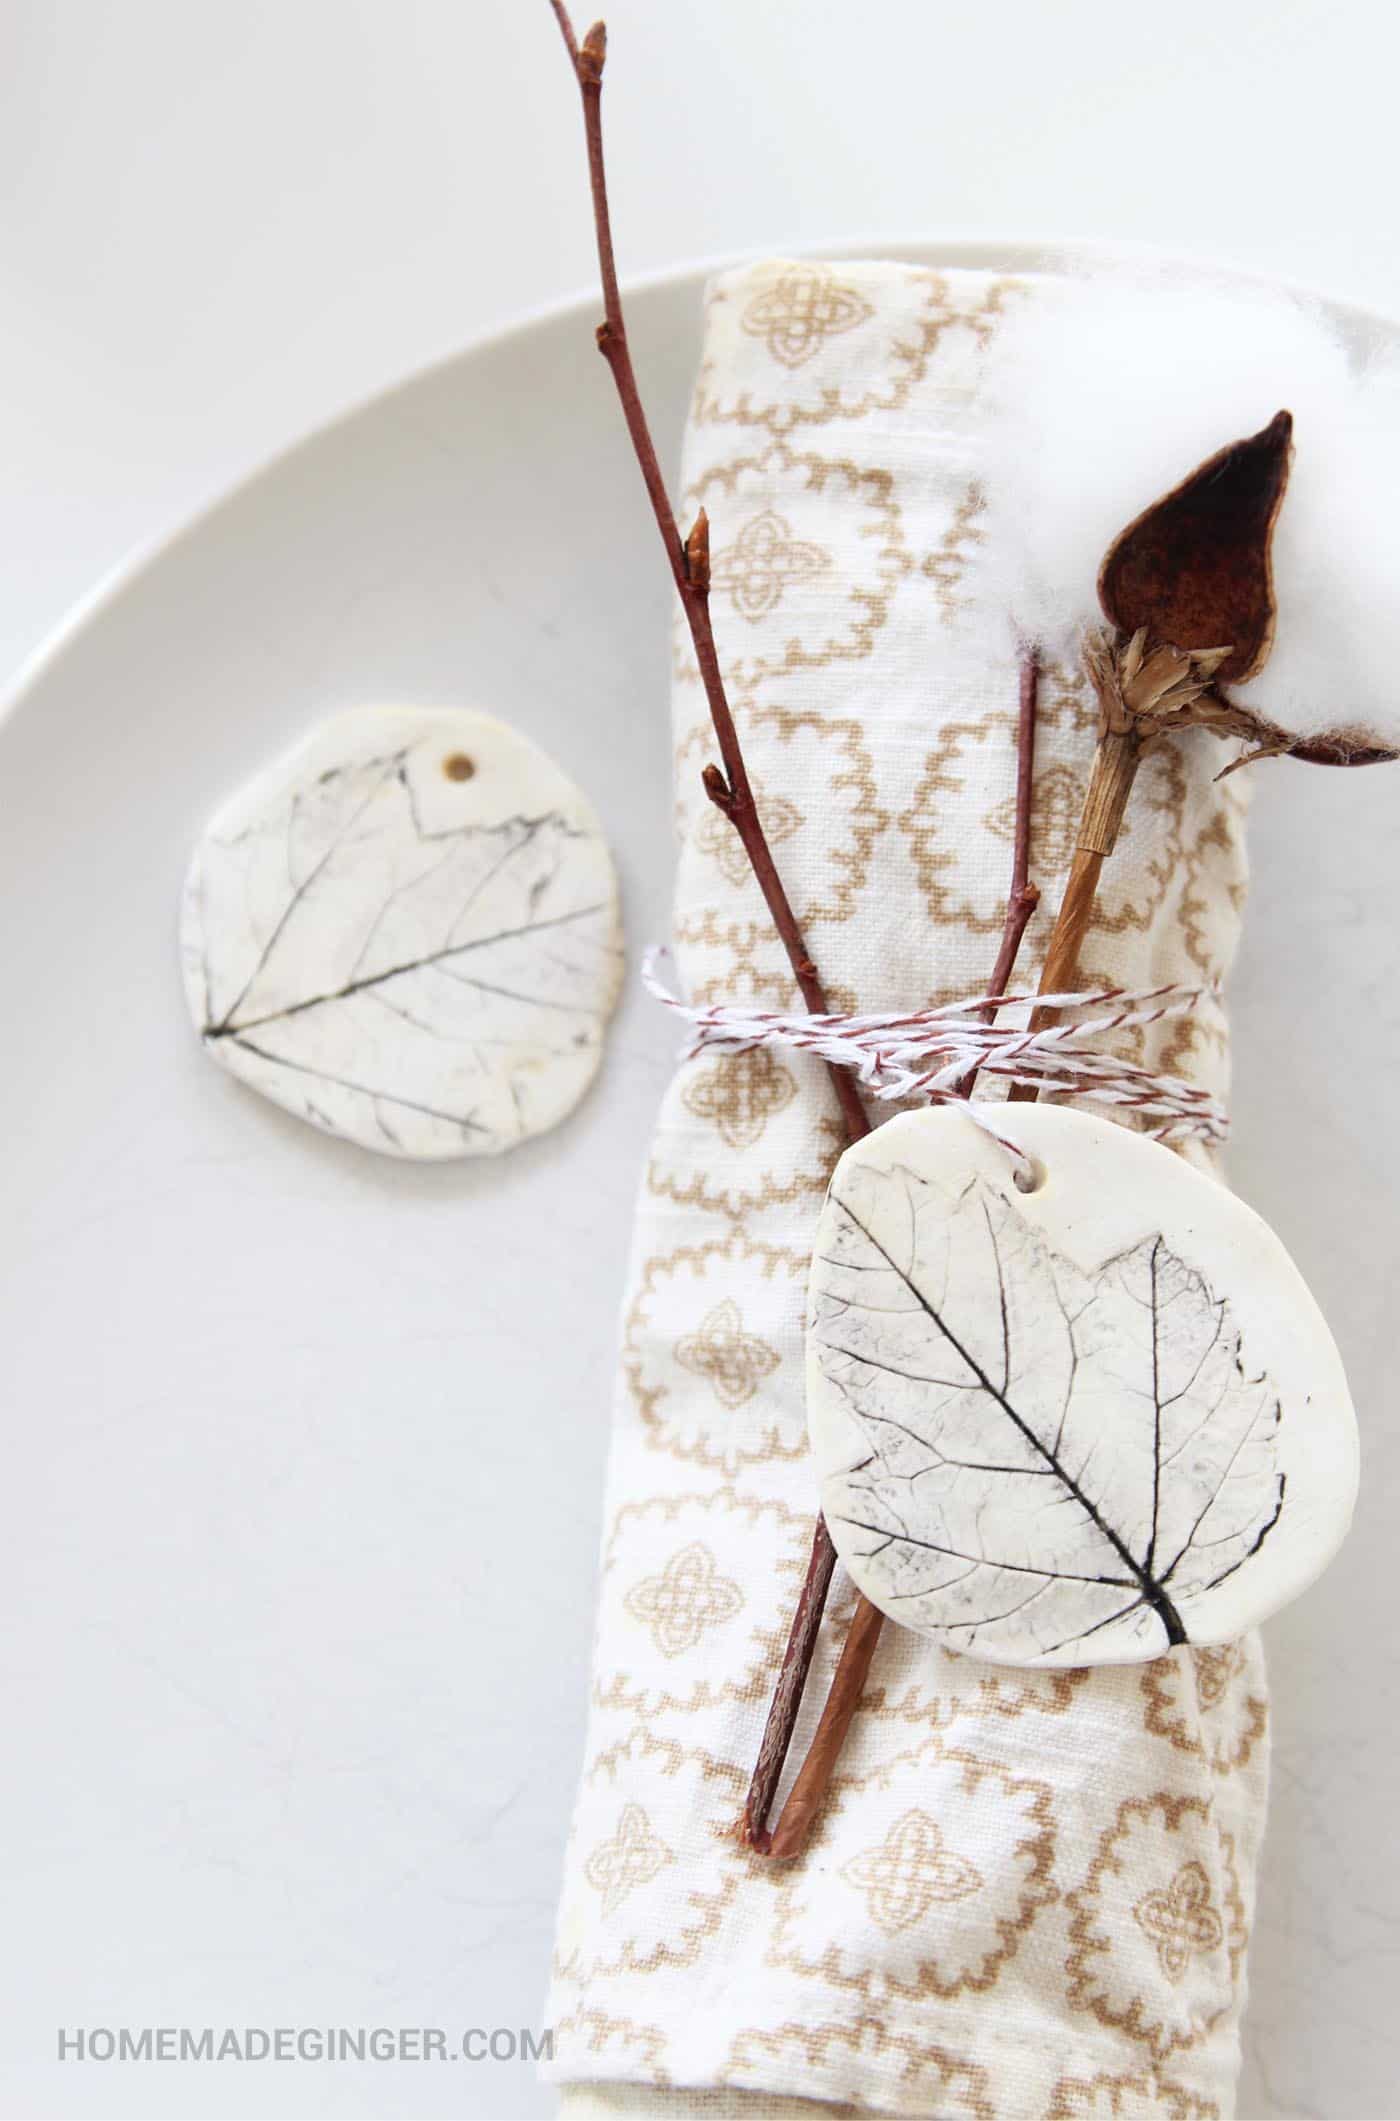 Fall Clay Projects With Air Dry Clay - Rustic Crafts & DIY